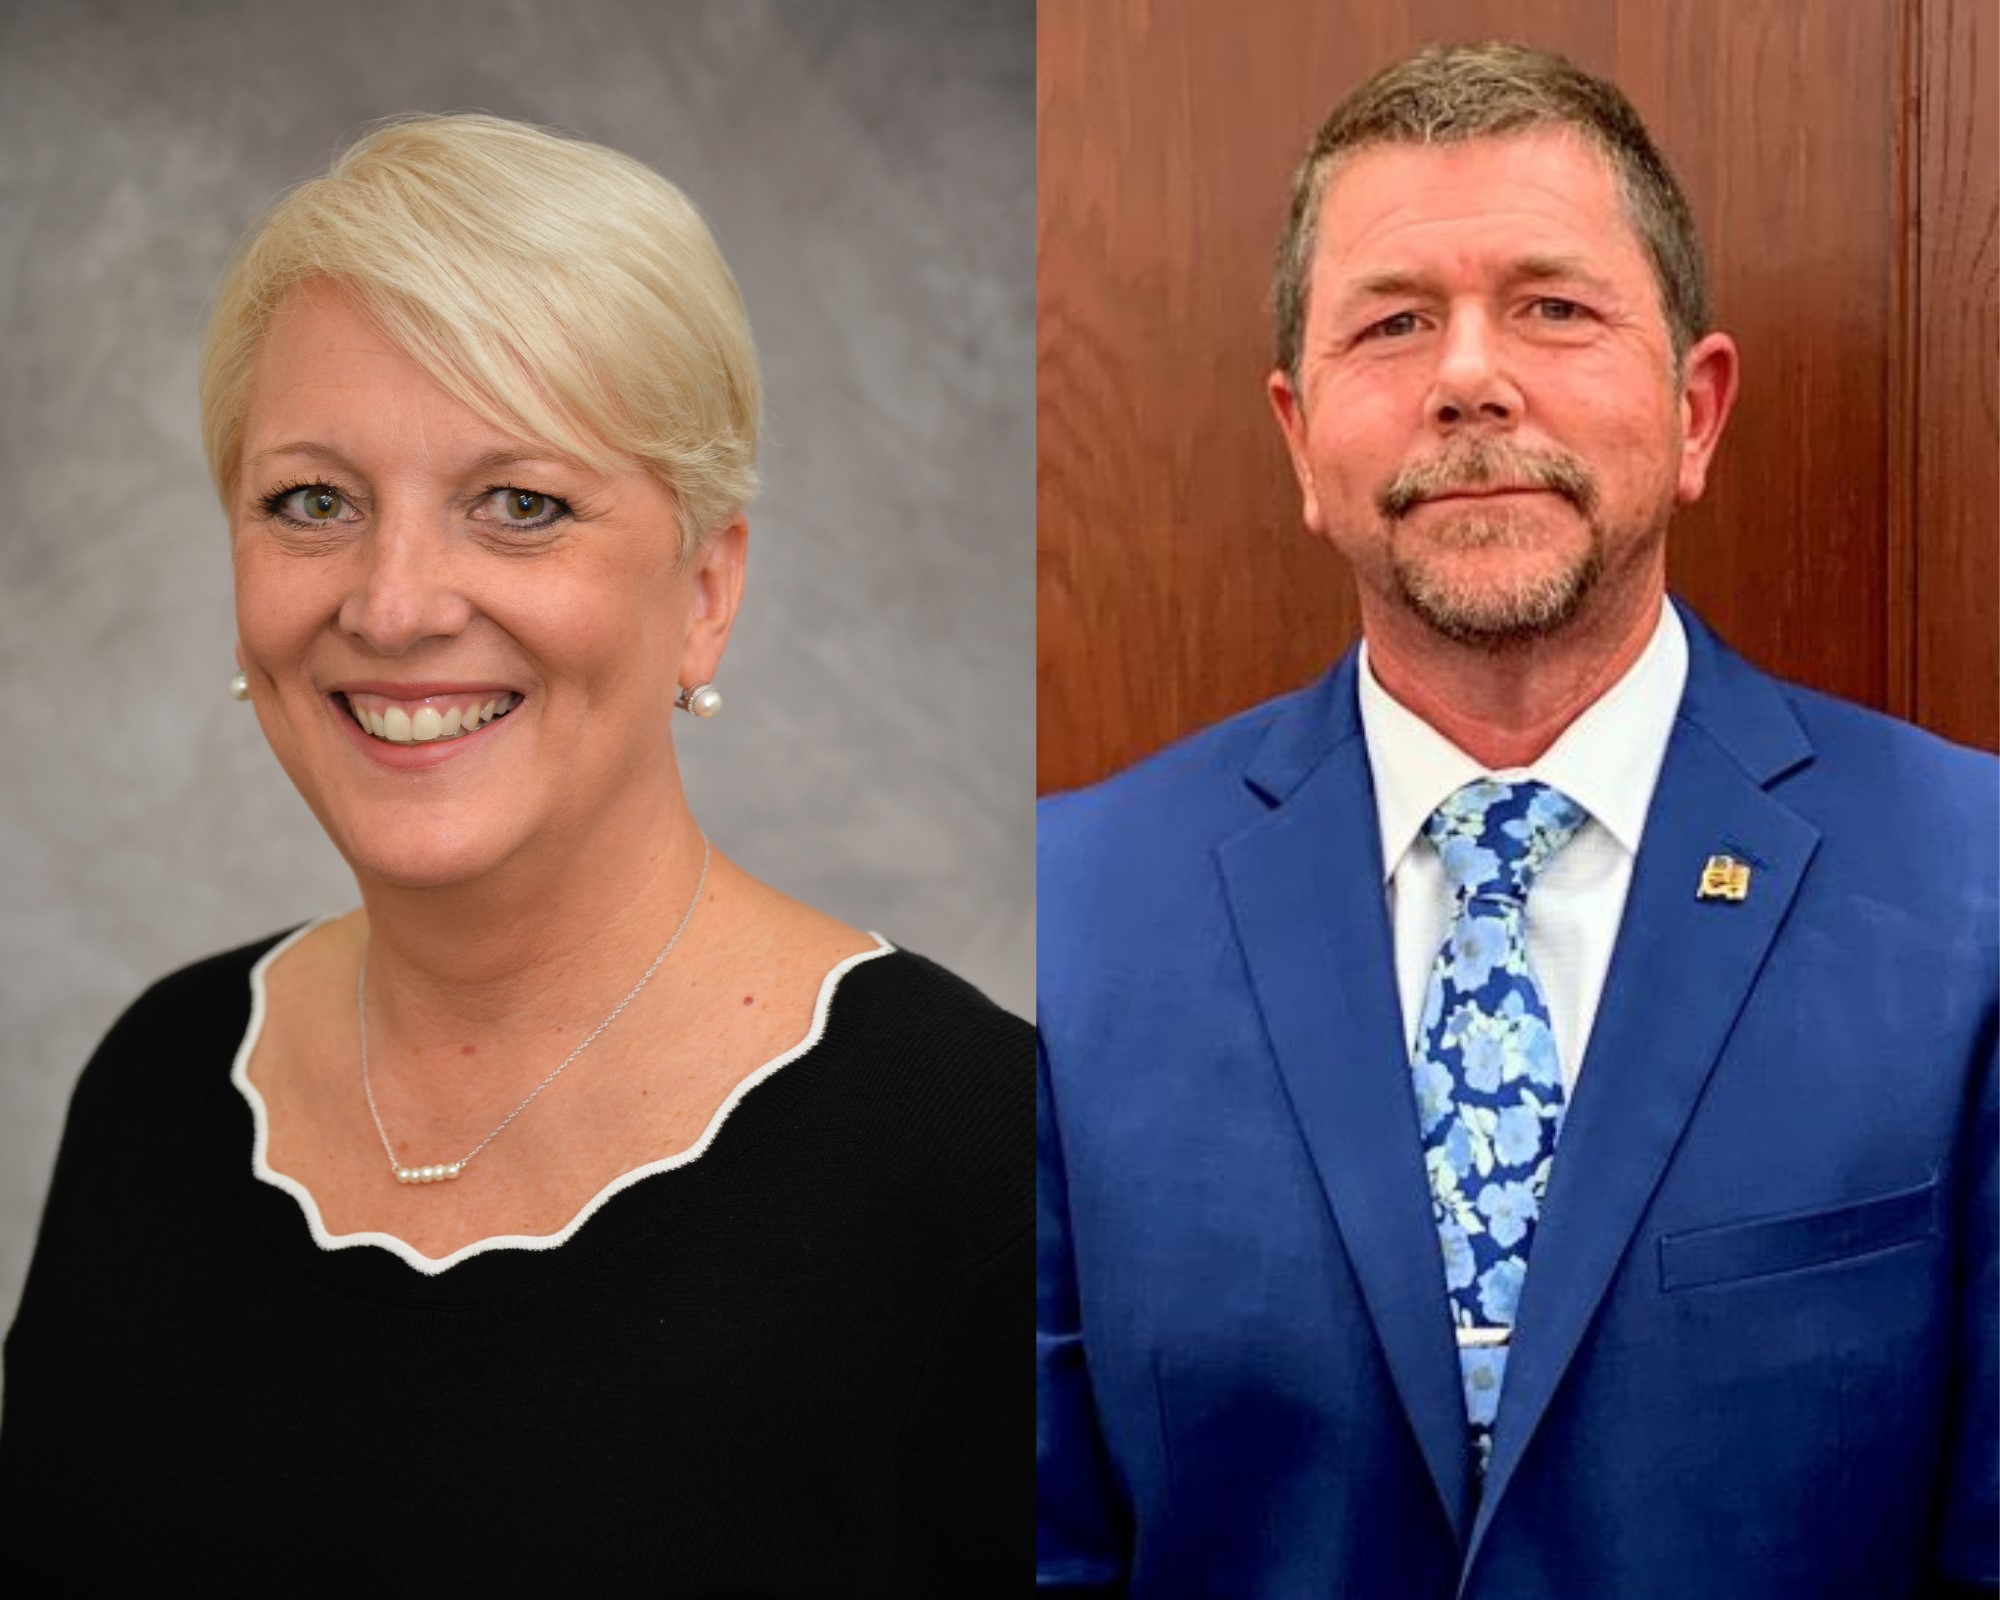 Amy L. Jackson (left), president and CEO of the Catoosa County Chamber of Commerce, was elected to the GNTC Foundation Board of Trustees along with Steven M. Henry, chairman of the Catoosa County Board of Commissioners and owner of SMH Construction, Inc.